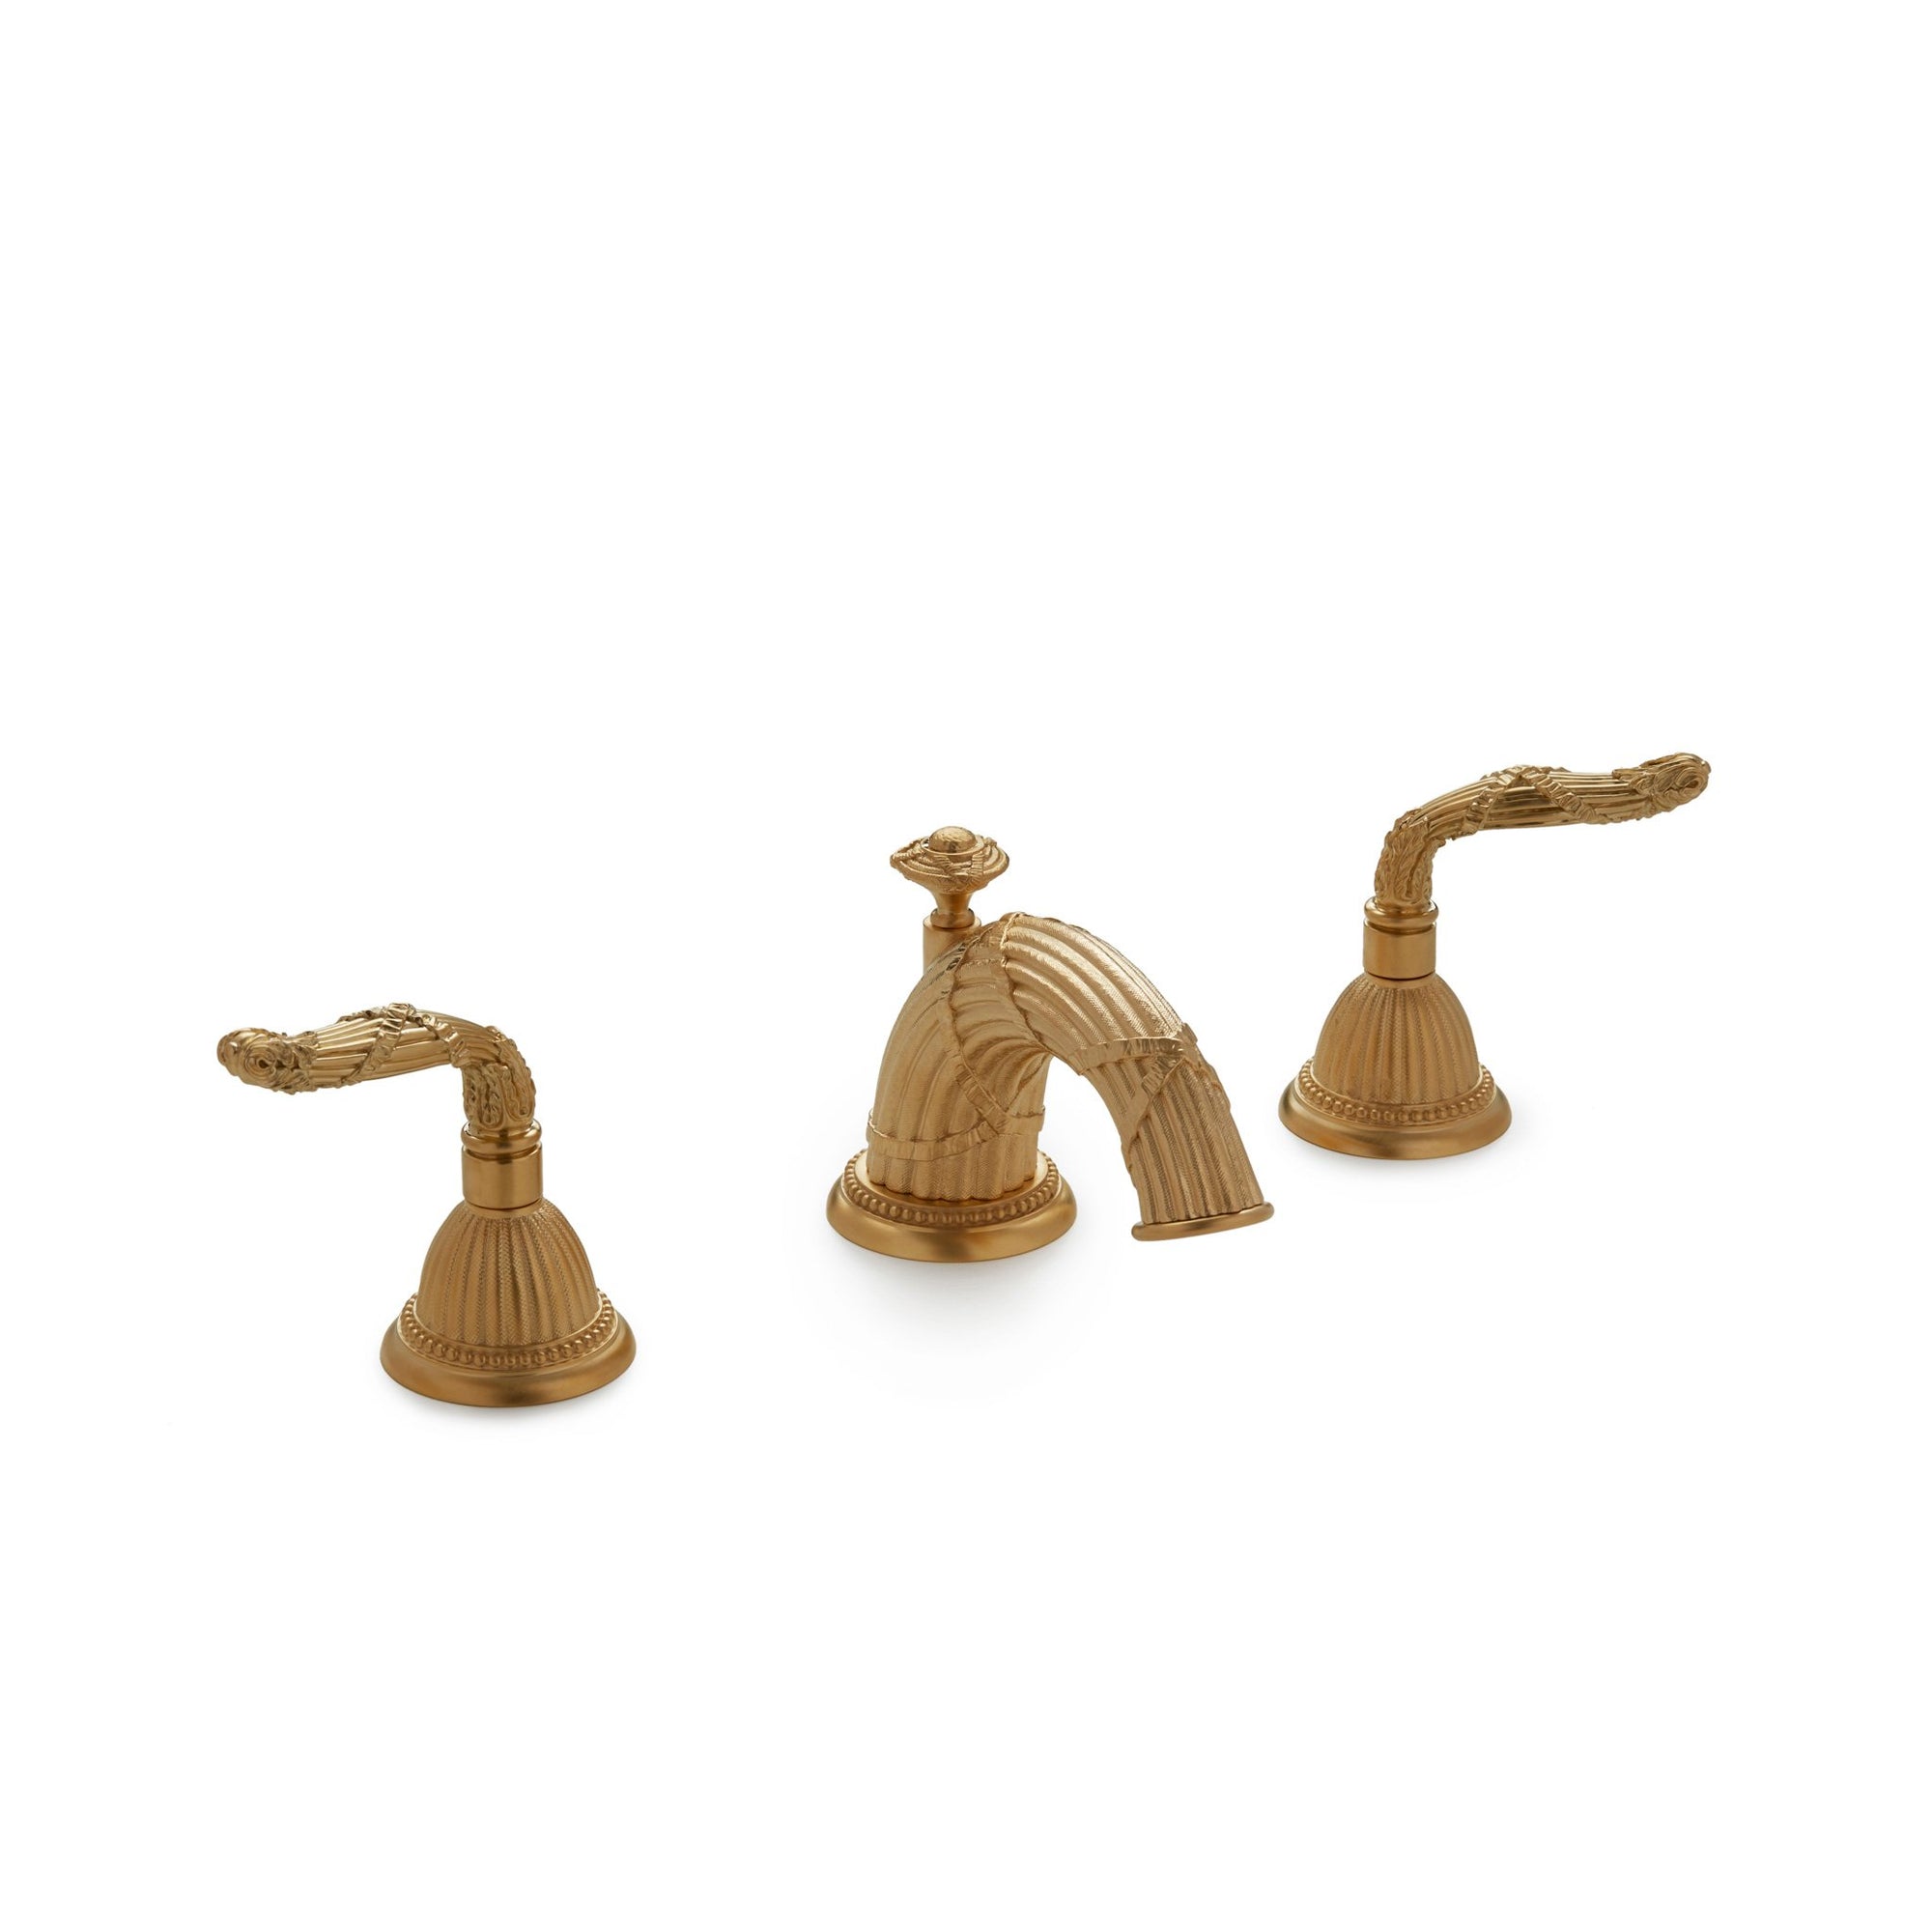 0931BSN-GP Sherle Wagner International Louis Seize Lever Faucet Set in Gold Plate metal finish